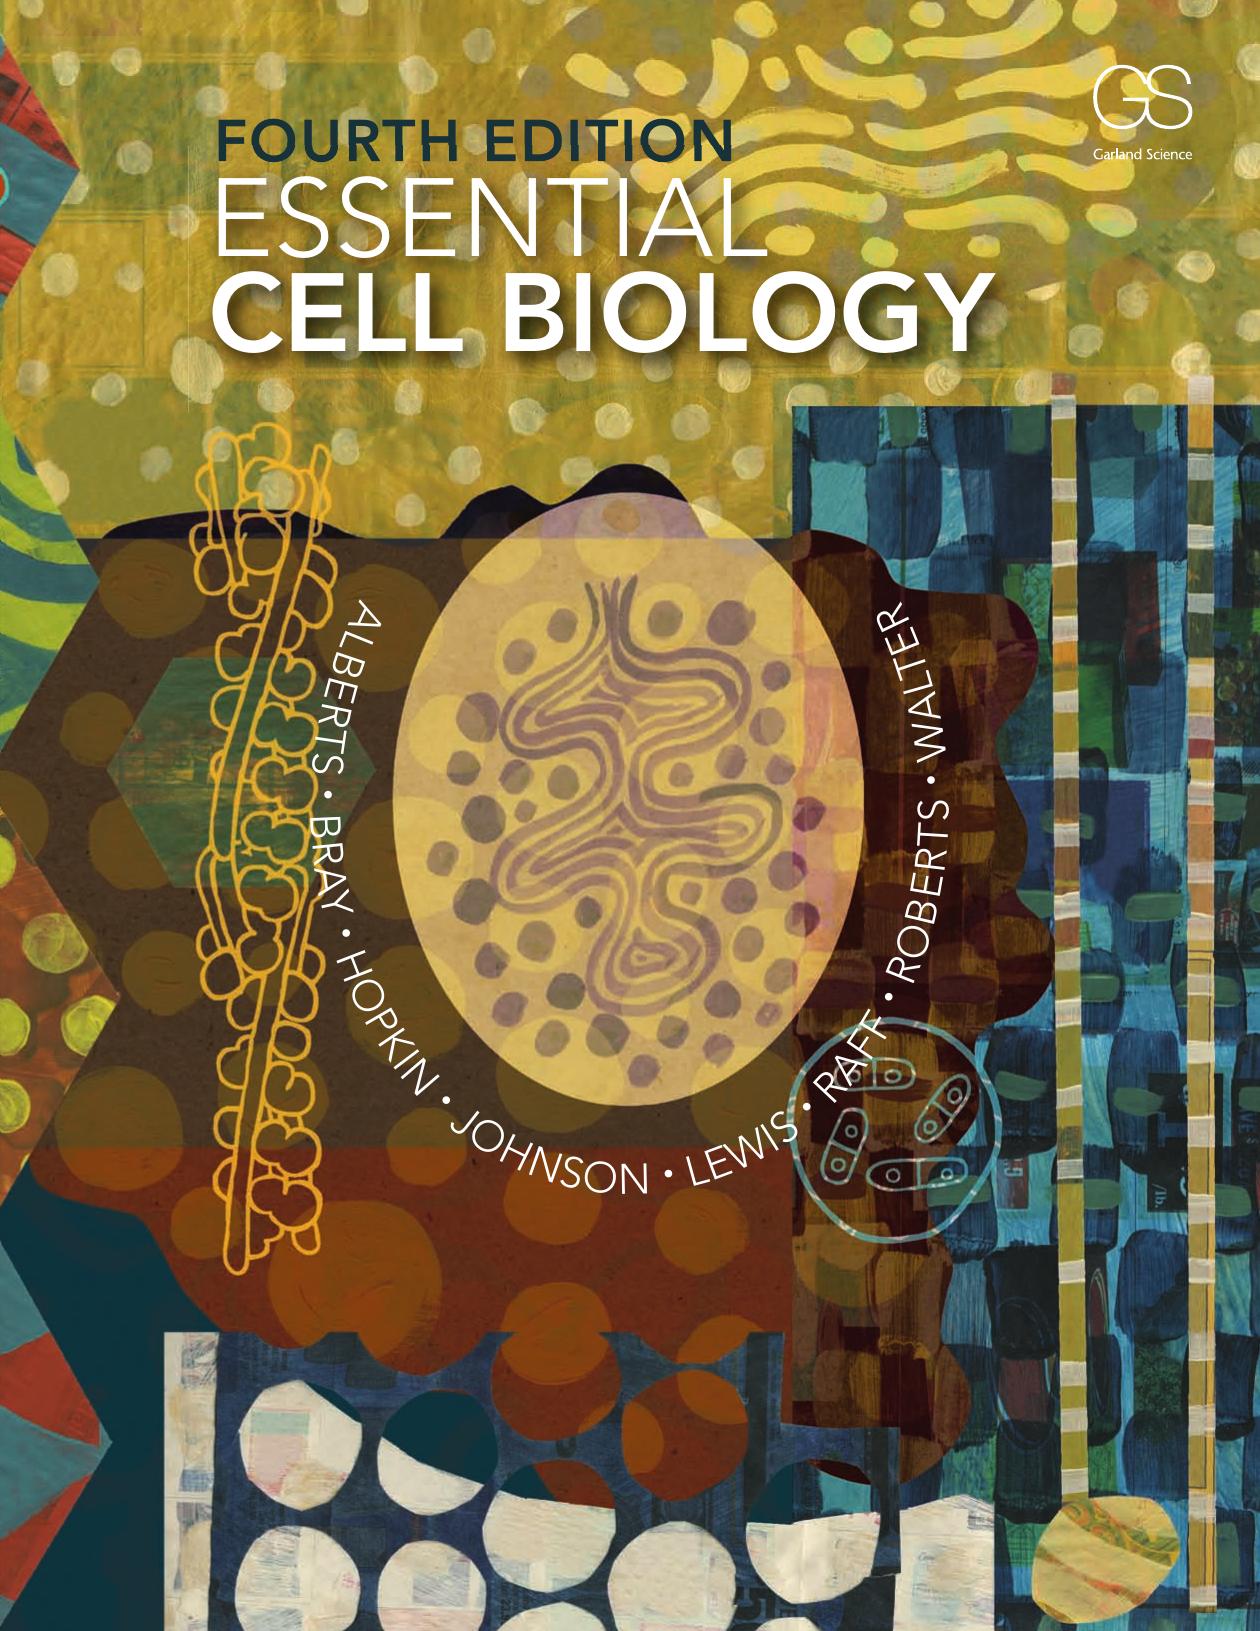 Essential cell biology  4th Edition( PDFDrive.com ) 2014